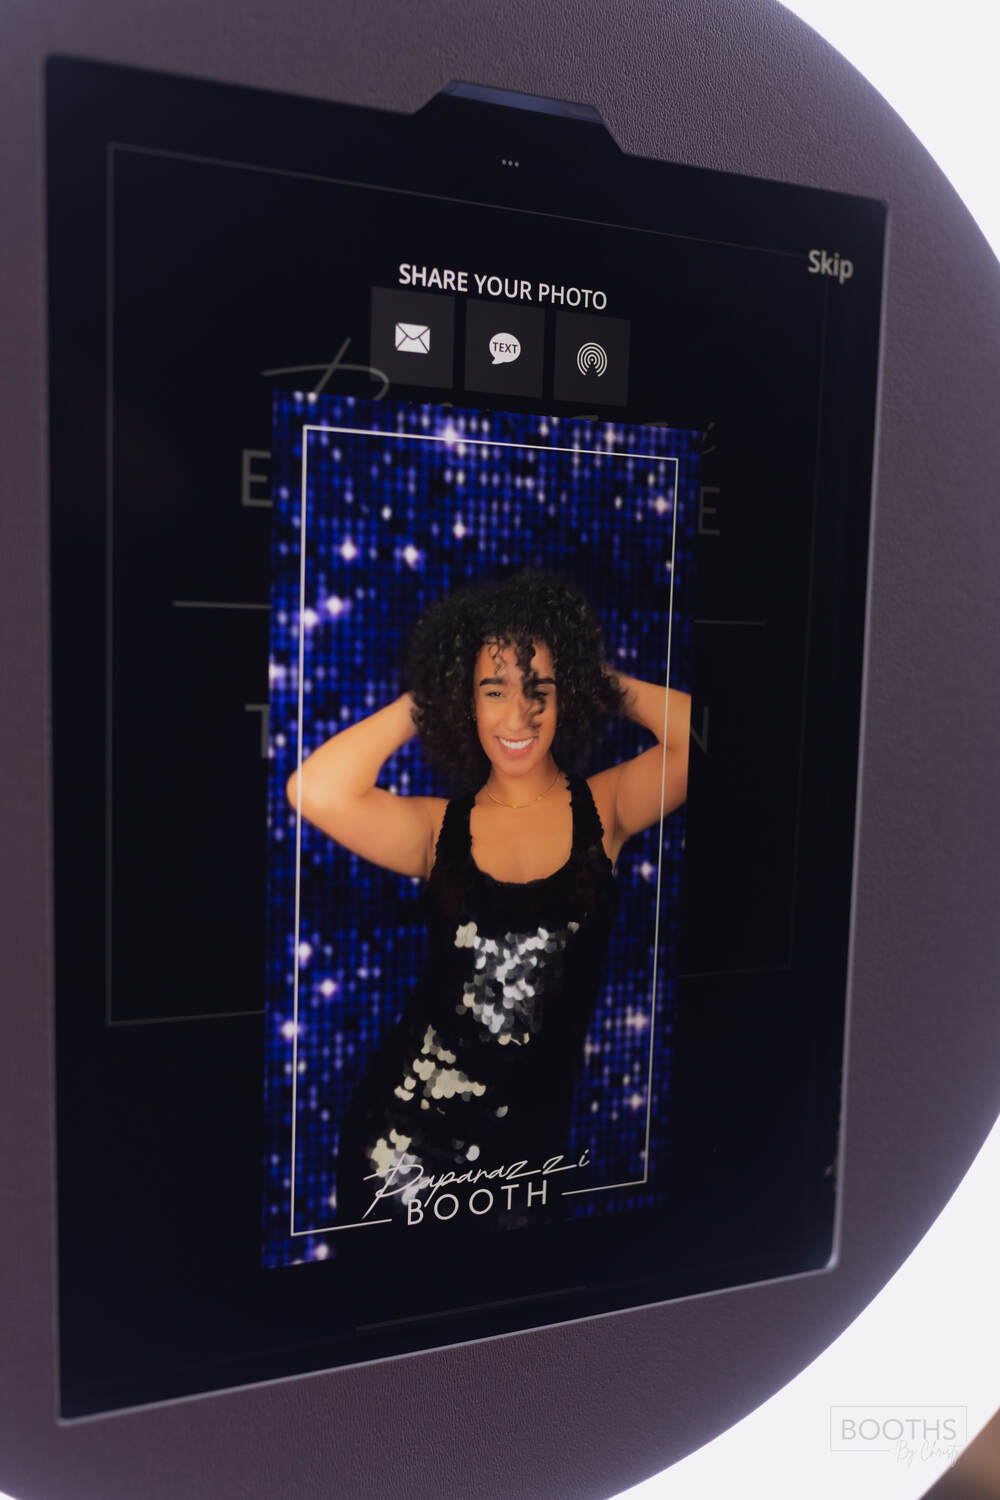  Learn about the instant printing and social sharing features of our Paparazzi Booths.